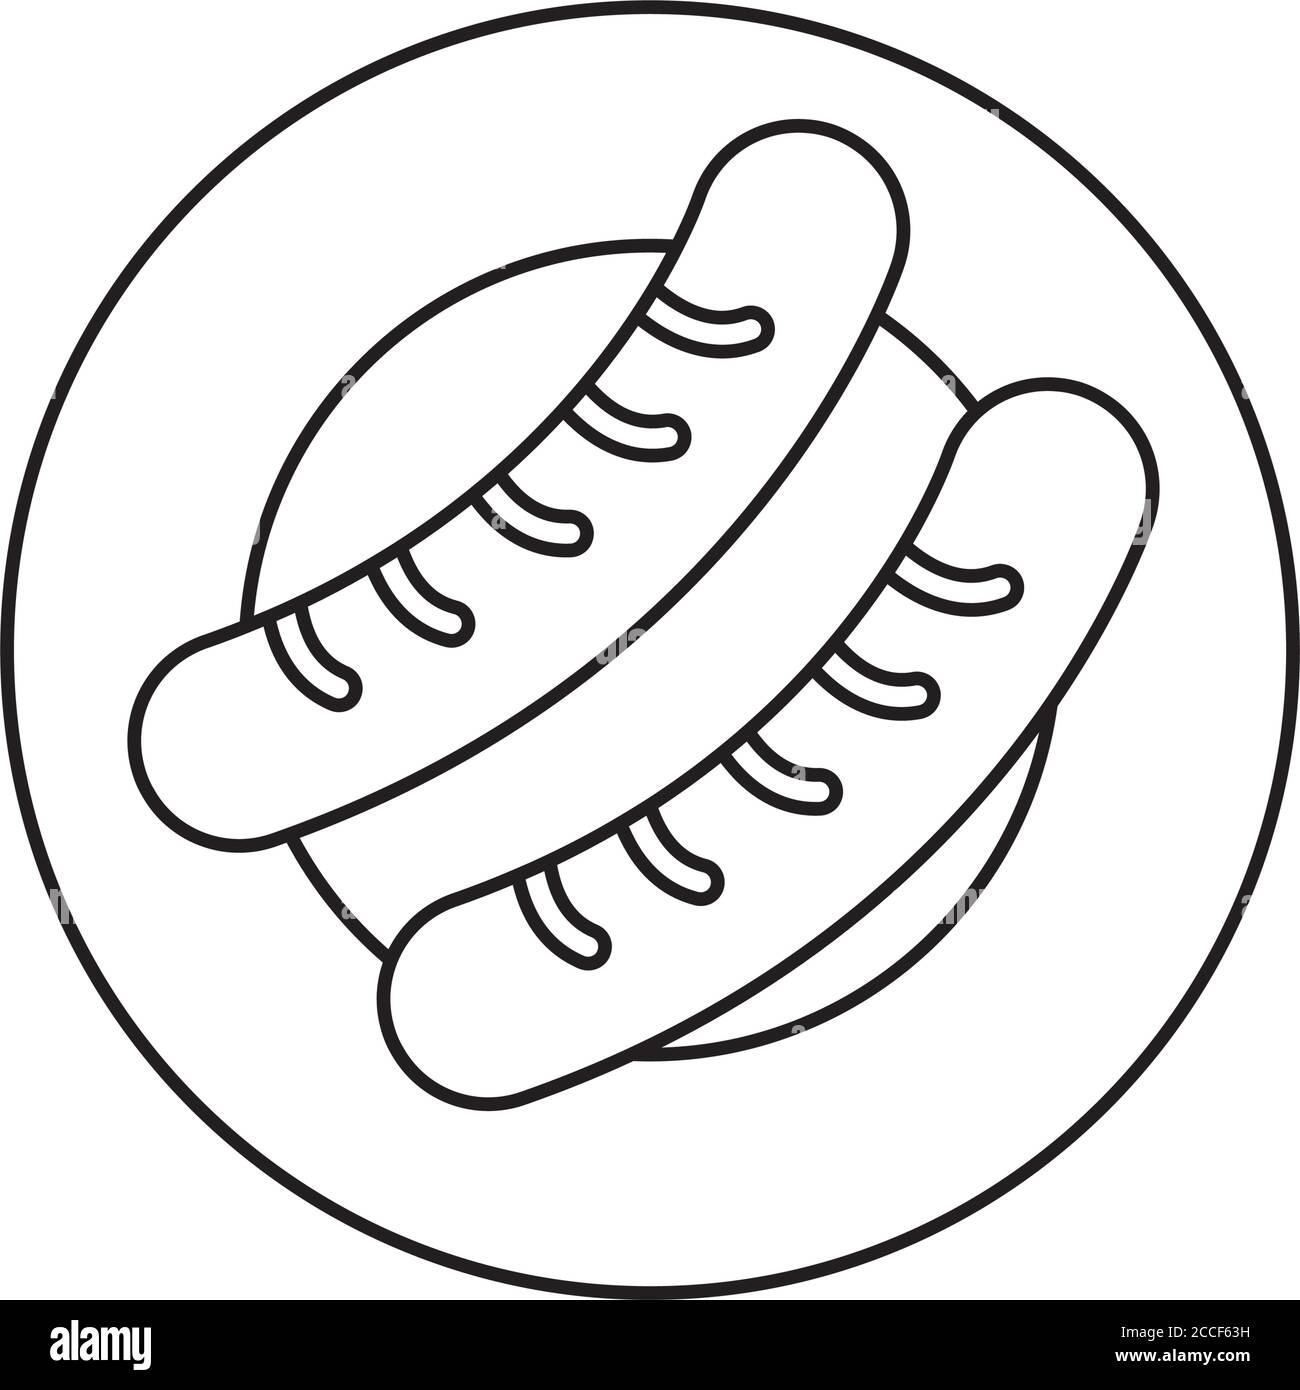 plate with sausages icon over white background, line style, vector illustration Stock Vector